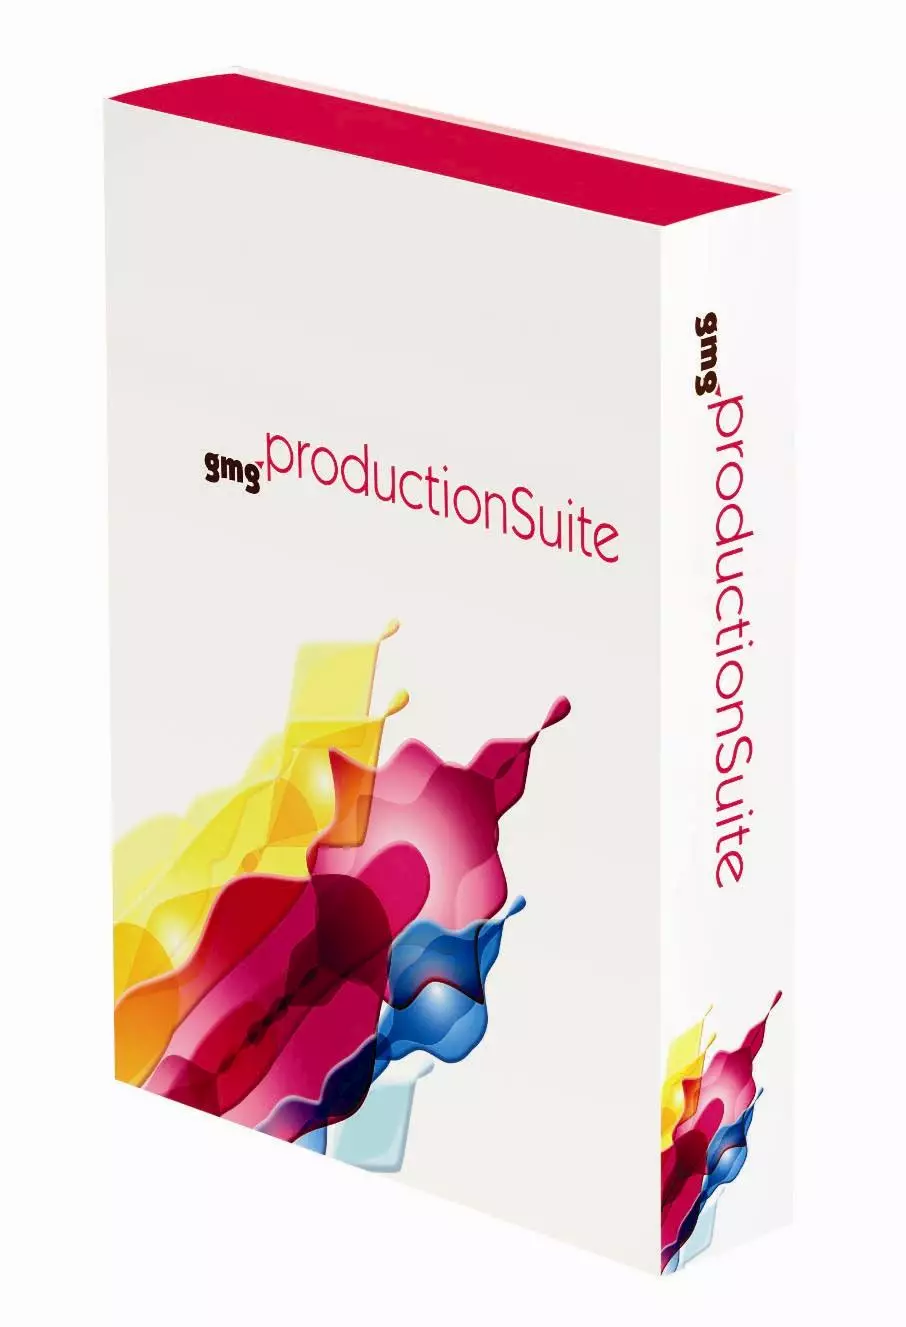 GMG ProductionSuite